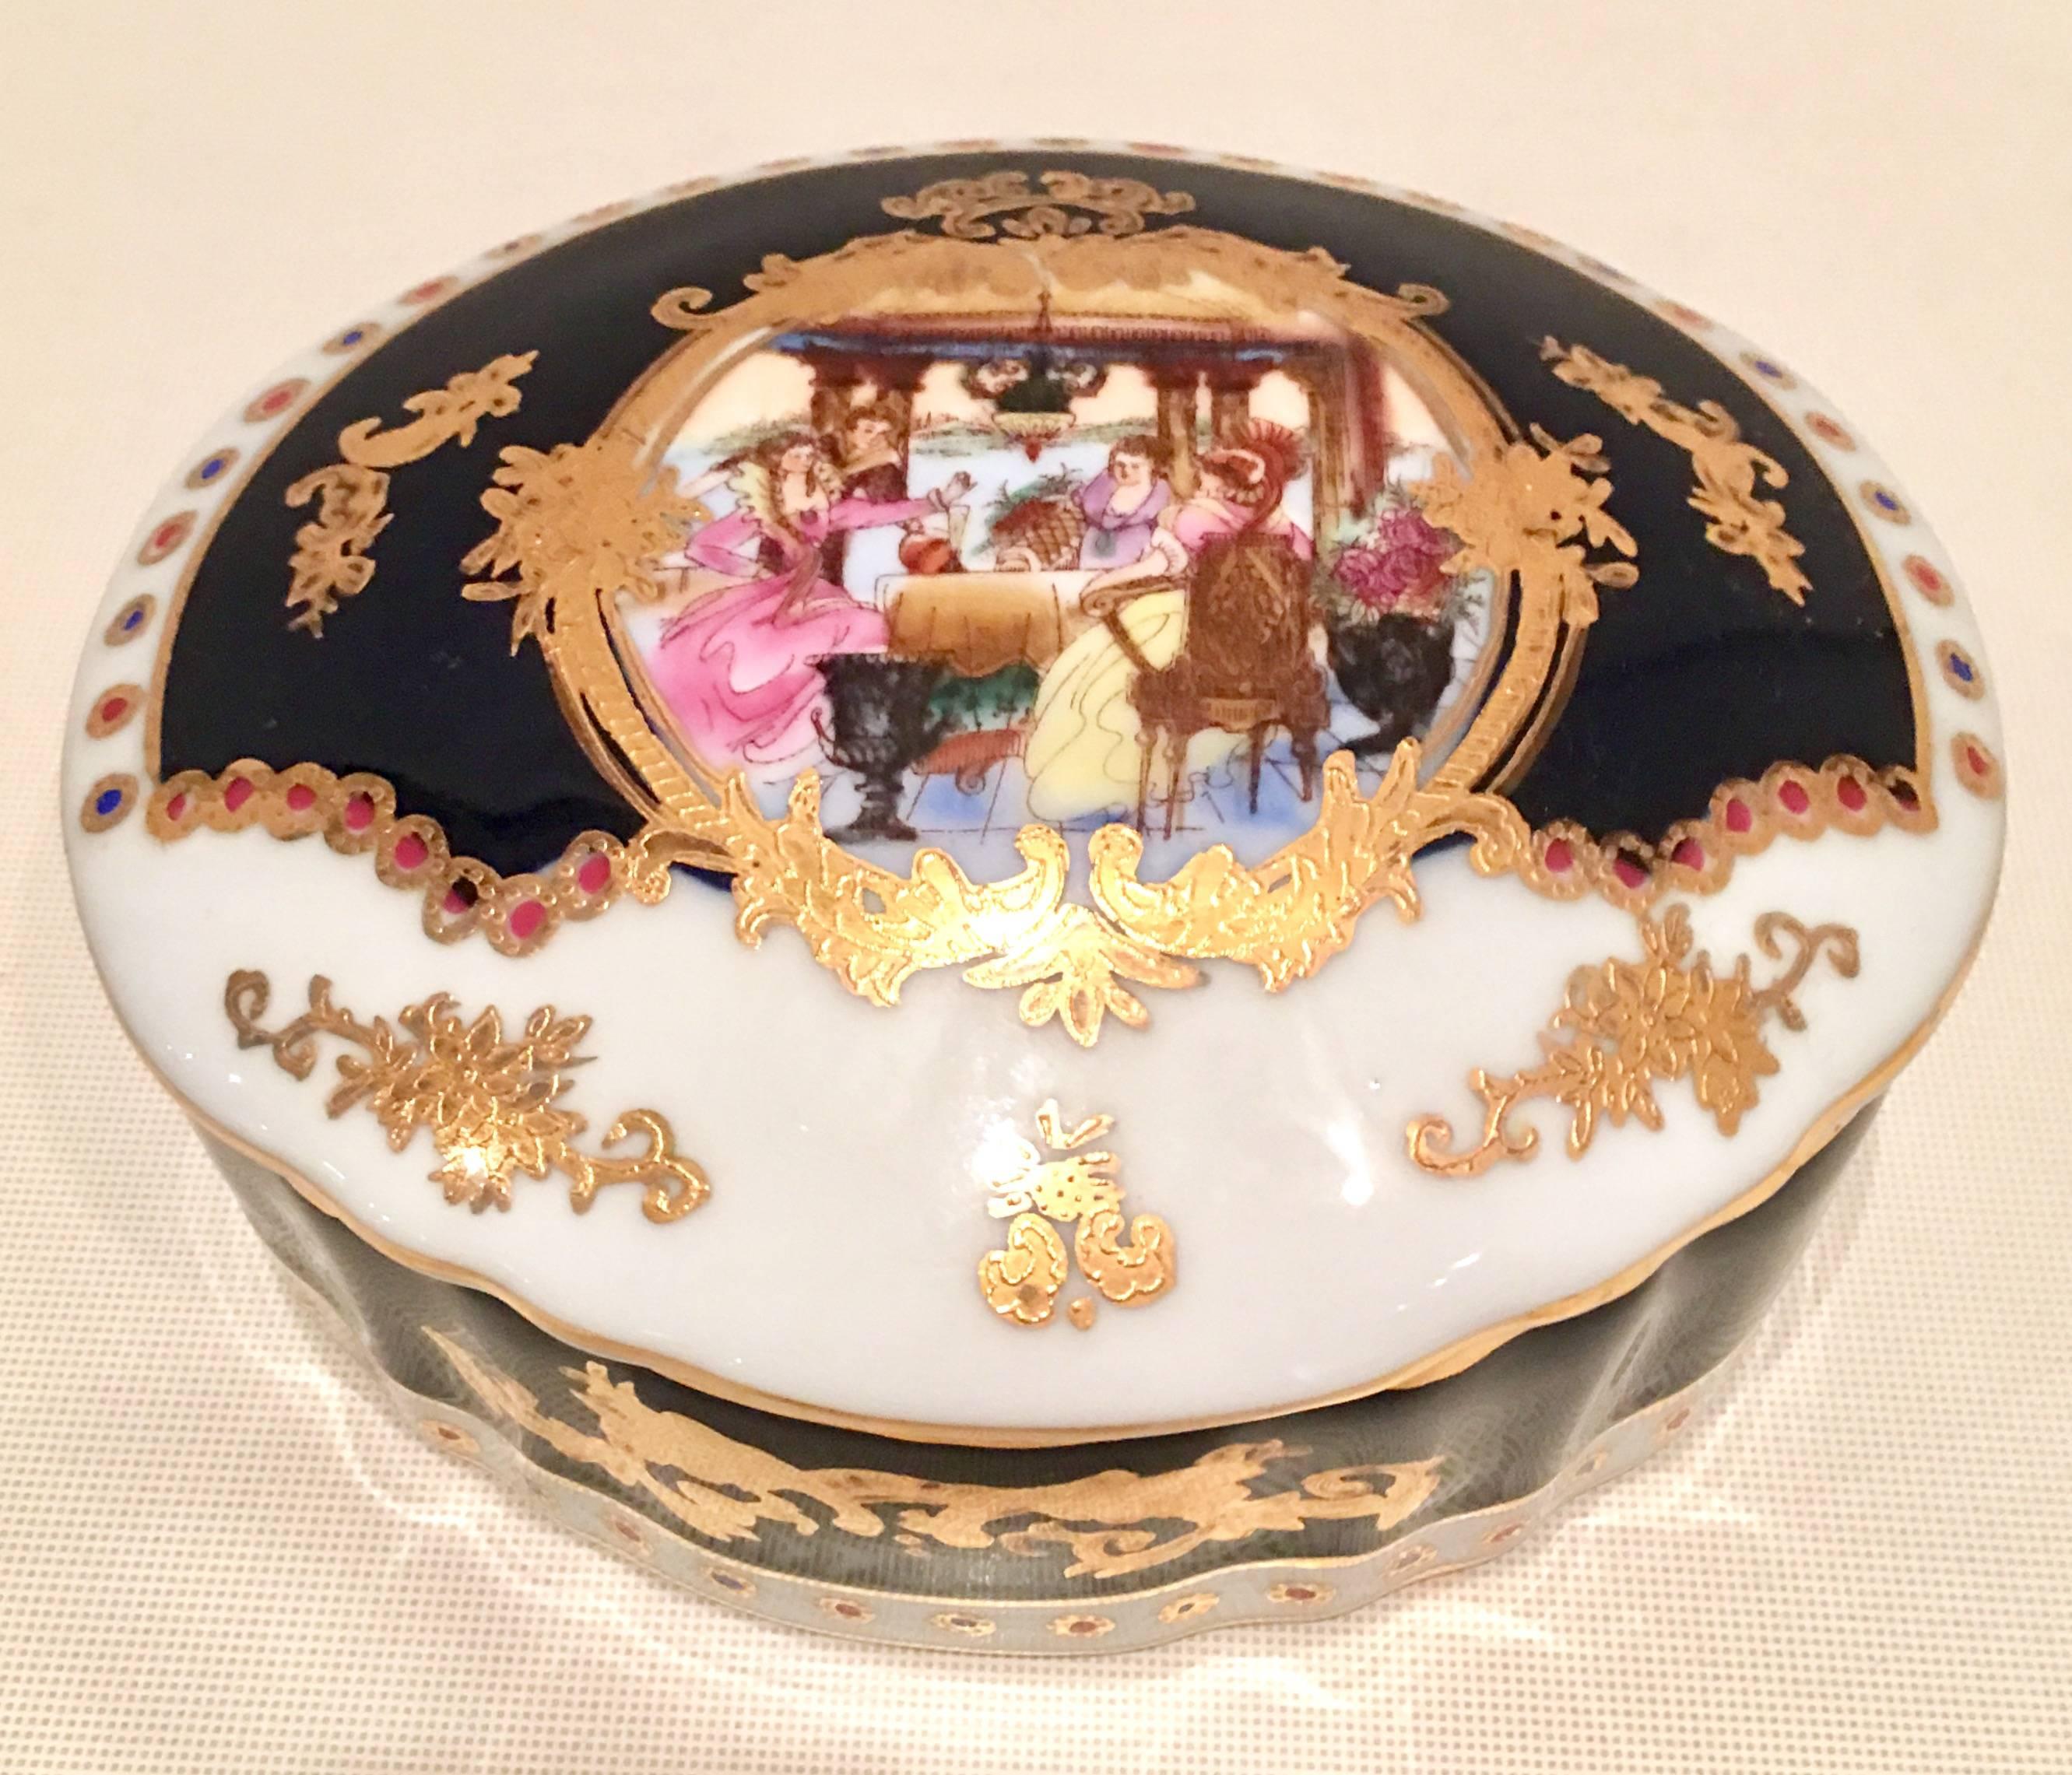 Mid-20th century French Sevres Limoges style, Porcelain hand-painted Cobalt & 22-karat gold large handled tray and lidded oval box. This three-piece set includes a large oval tray with heart motif cut-out handles and oval lidded box. Each features